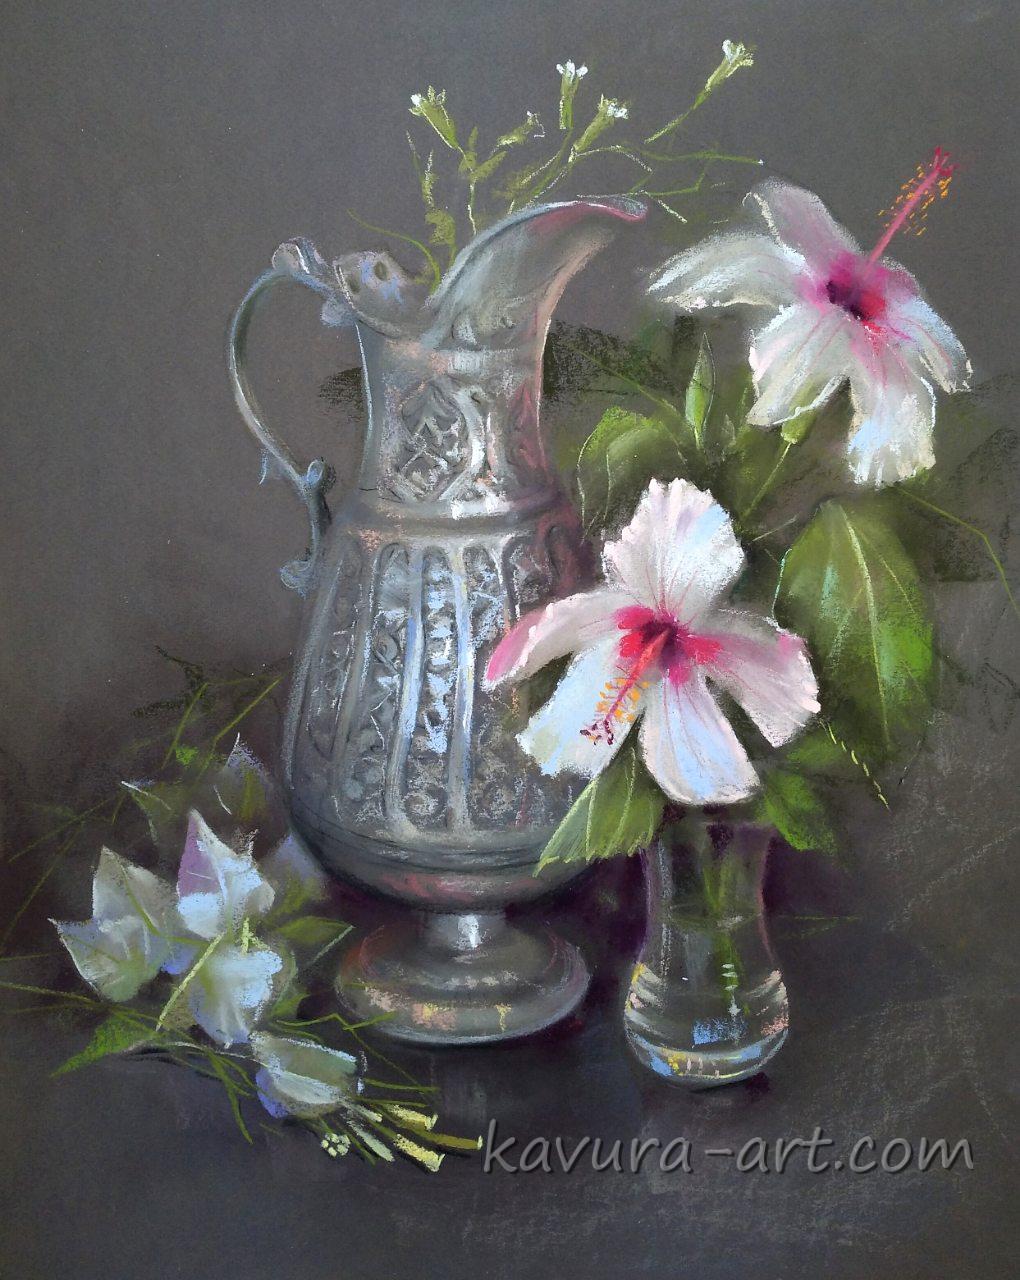 "Eastern etude with silver jug" Pastel on paper.